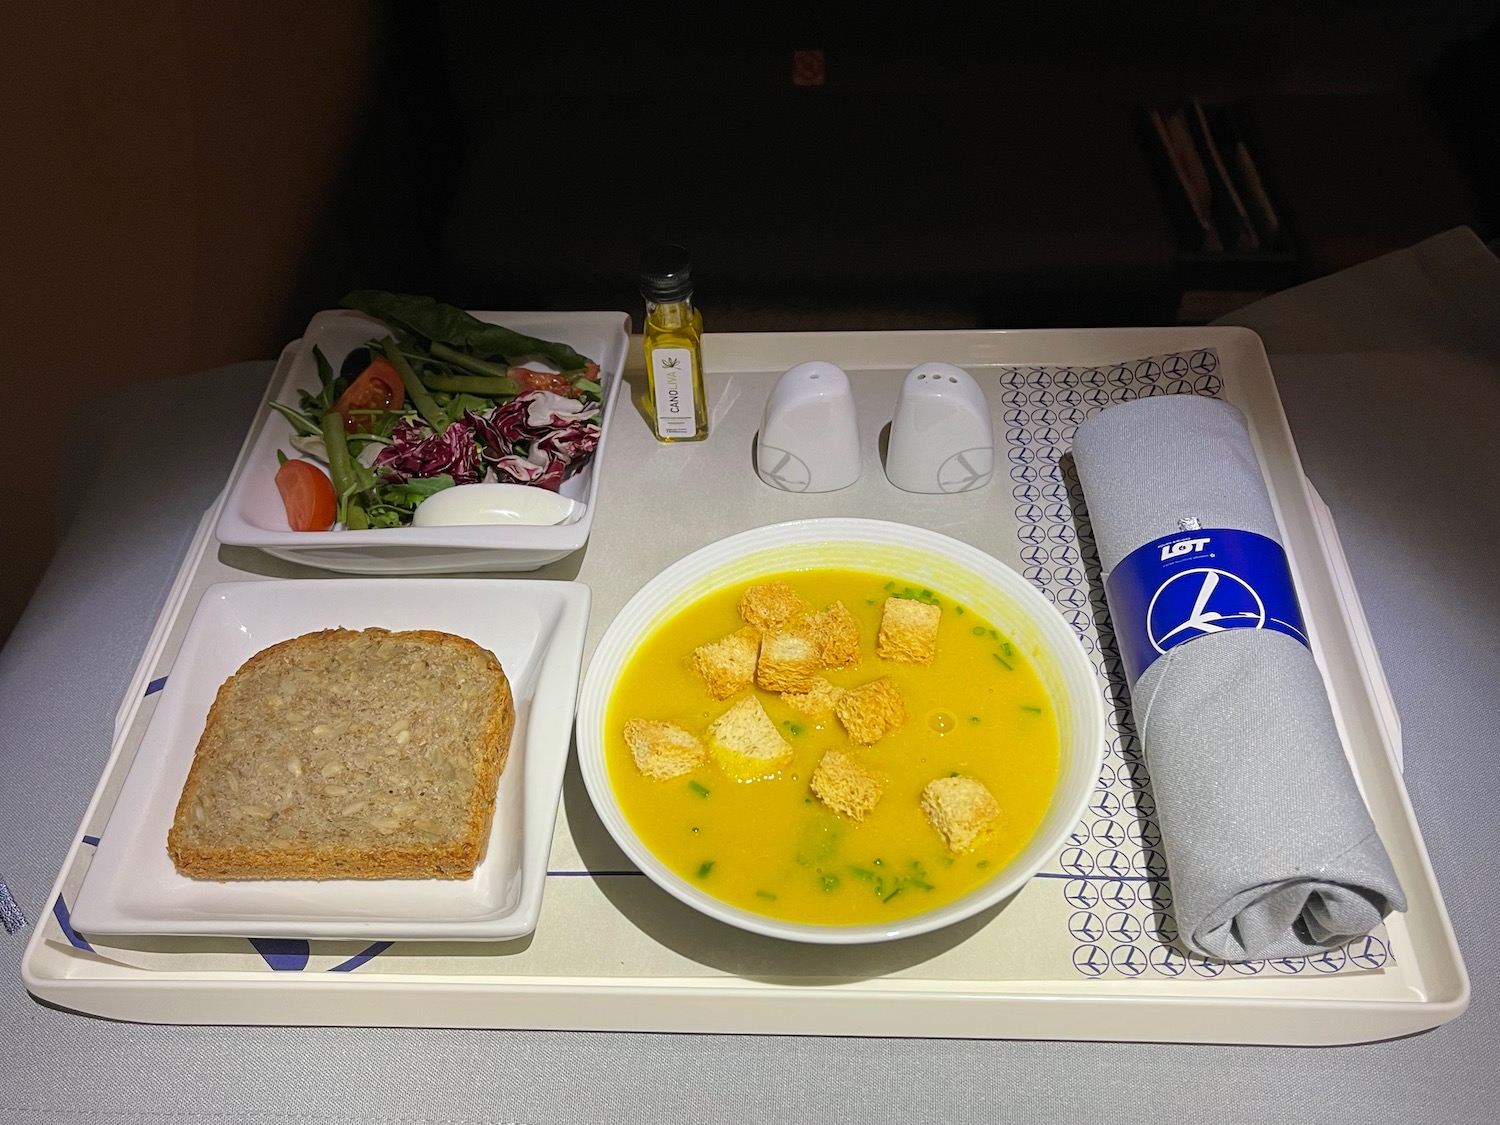 LOT Polish Airlines review: 787-8 economy class Los Angeles to Warsaw –  SANspotter